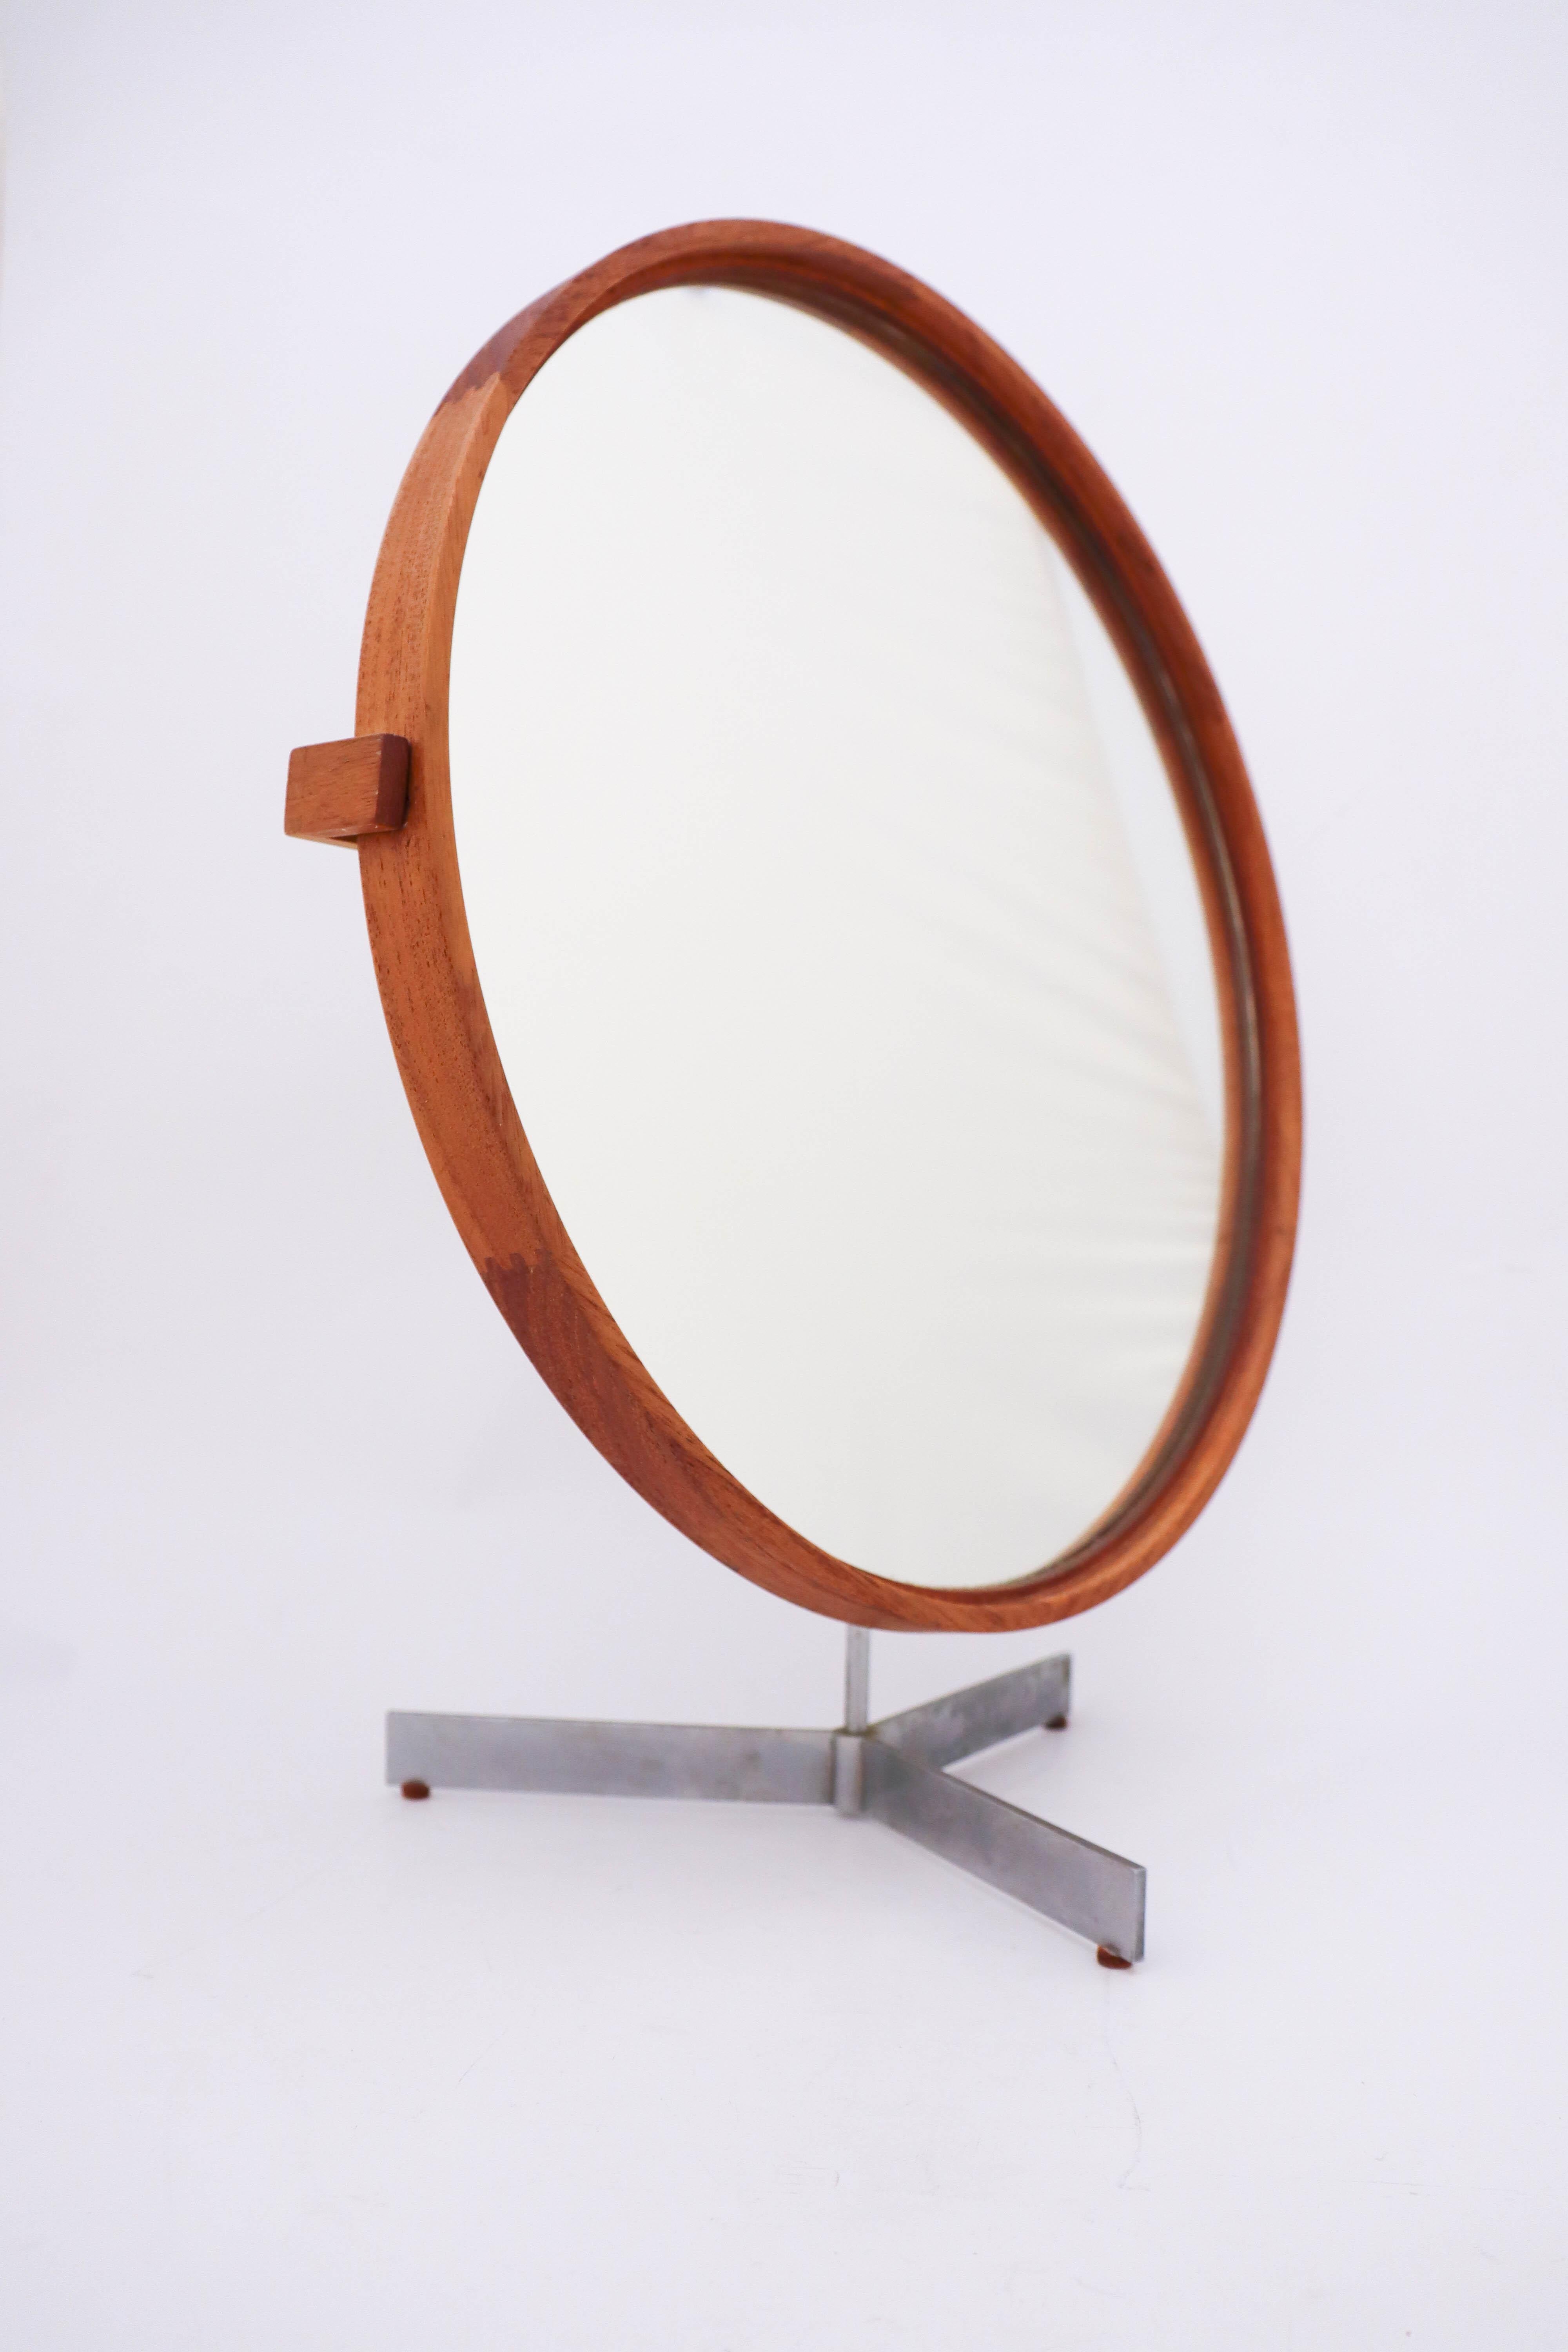 Rare table mirror designed by Uno & Östen Kristiansson. Produced by Luxus in Vittsjö, Sweden. Frame made from solid lime treated teak. Zipper joinery on the frame and the back piece. Base in brushed aluminum. It is adjustable in angle and swiveling.